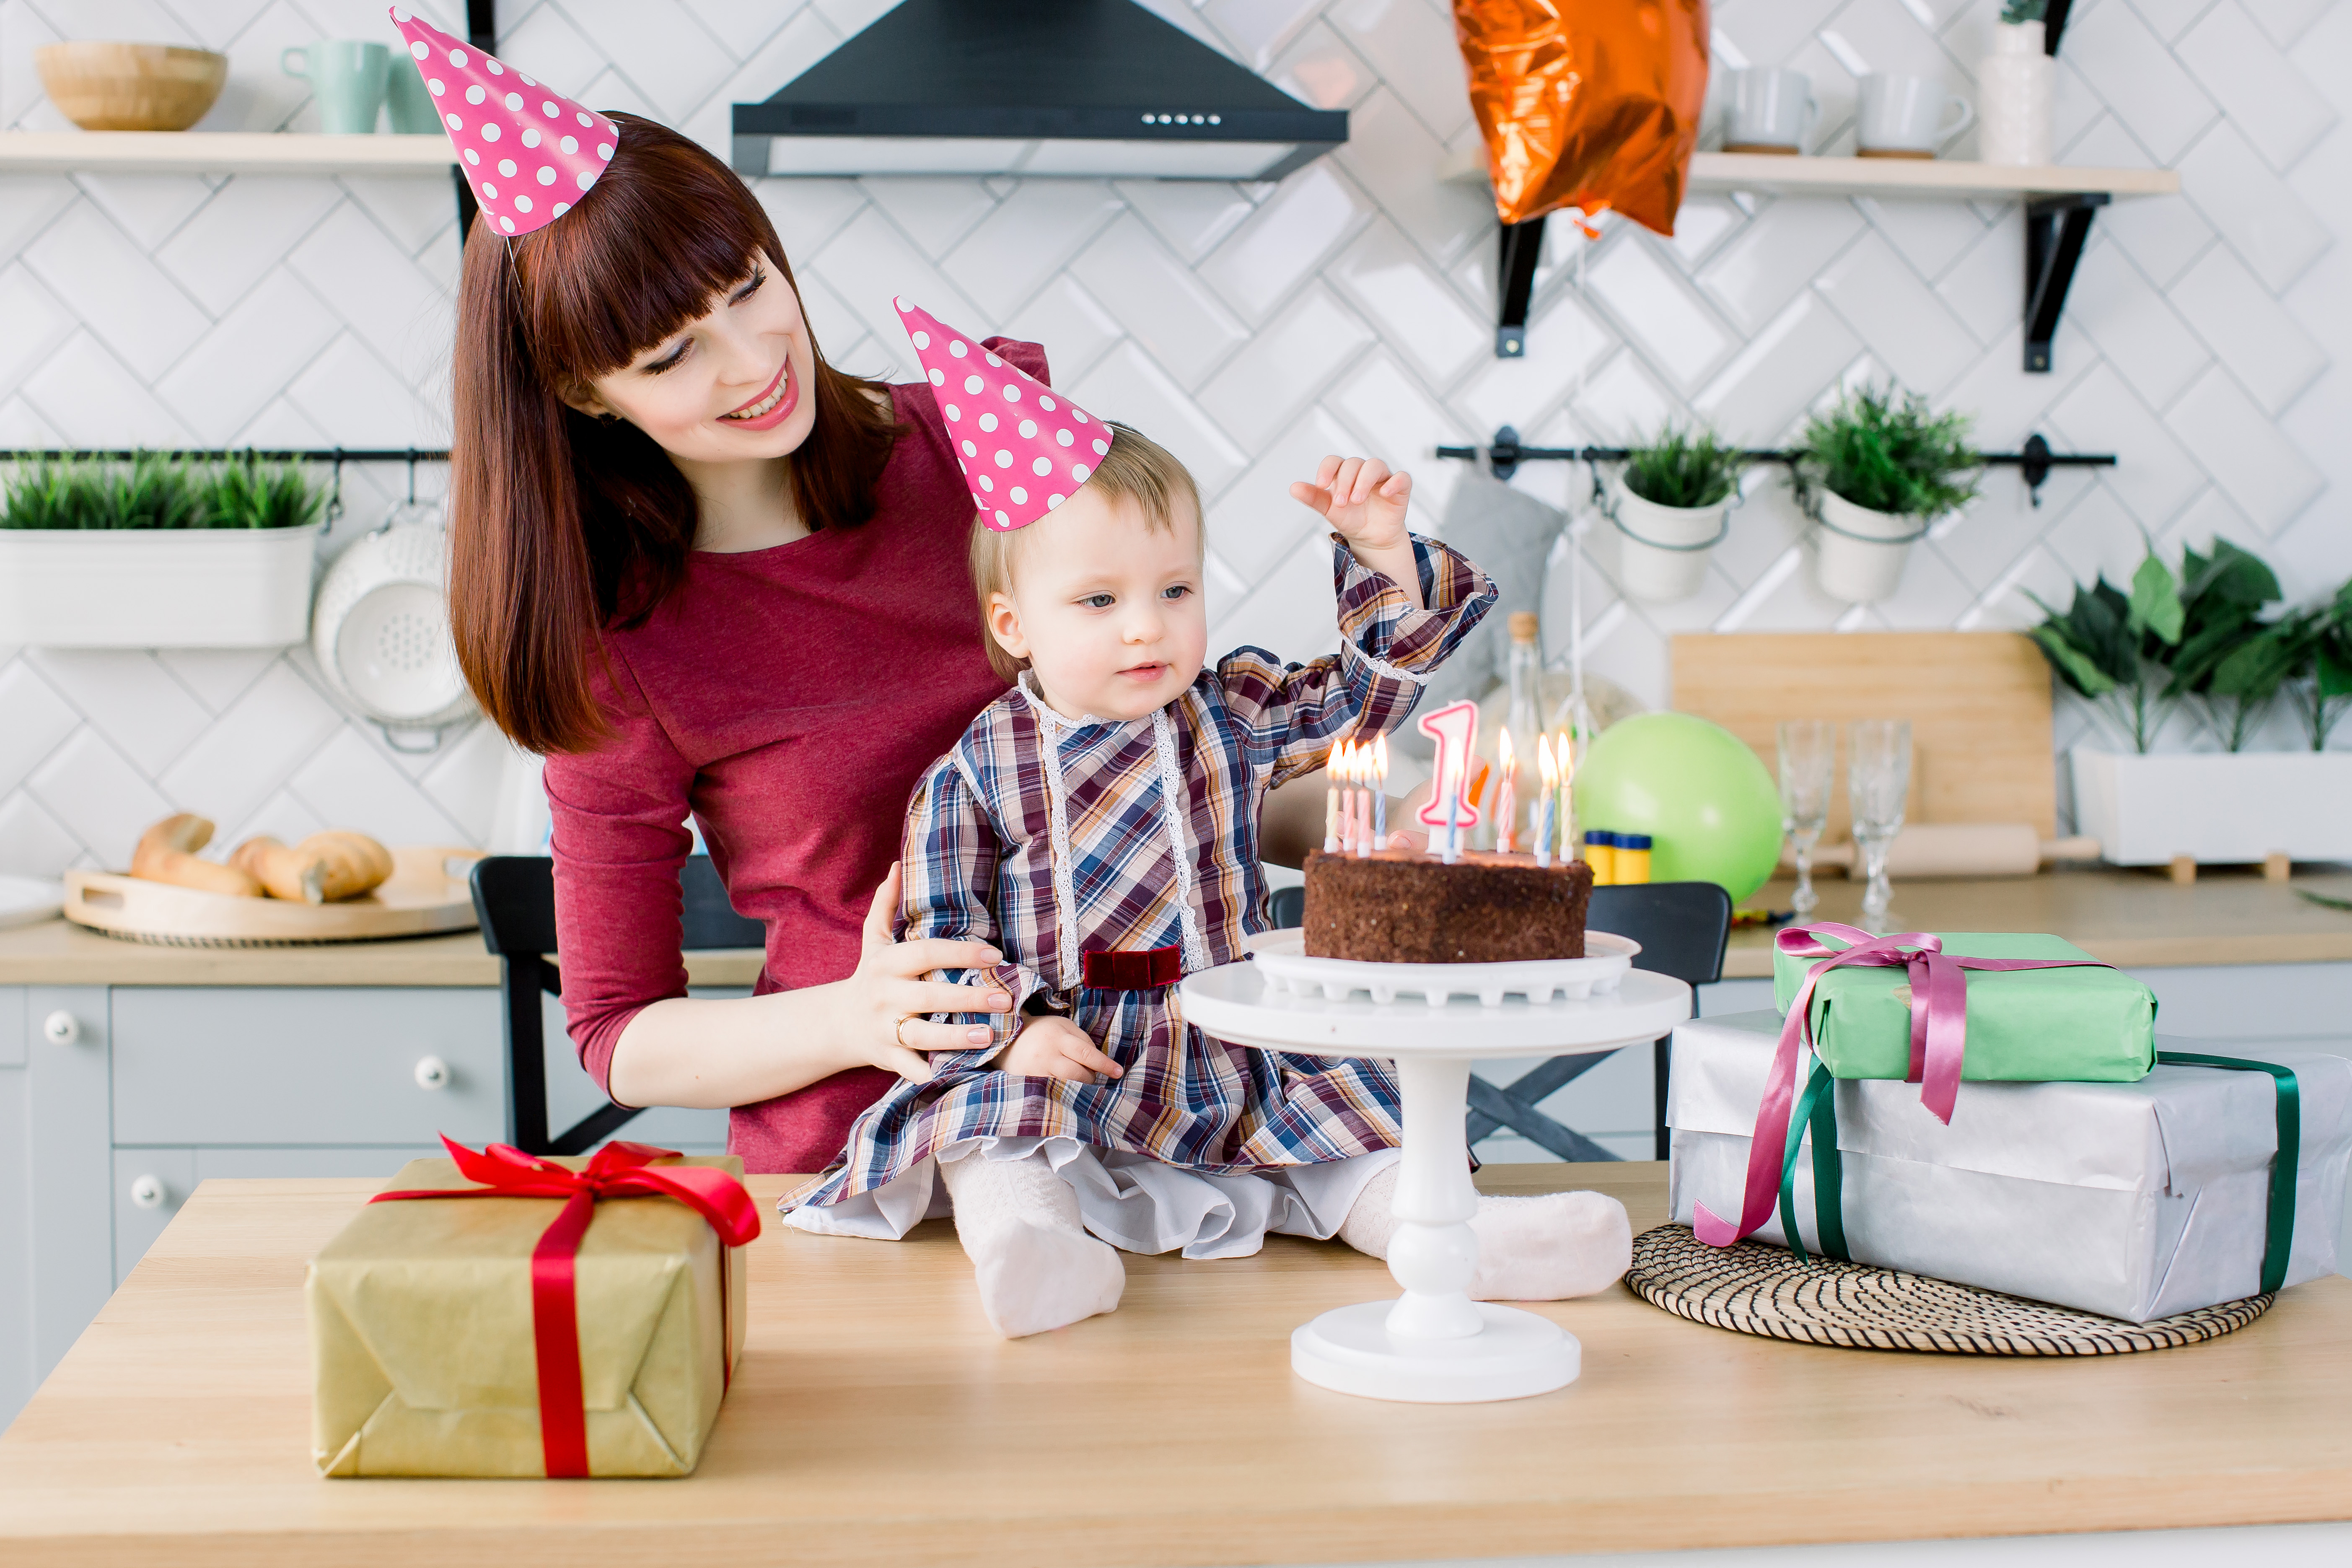 Ultimate Guide to Preparing for and Celebrating Your Child's First Birthday